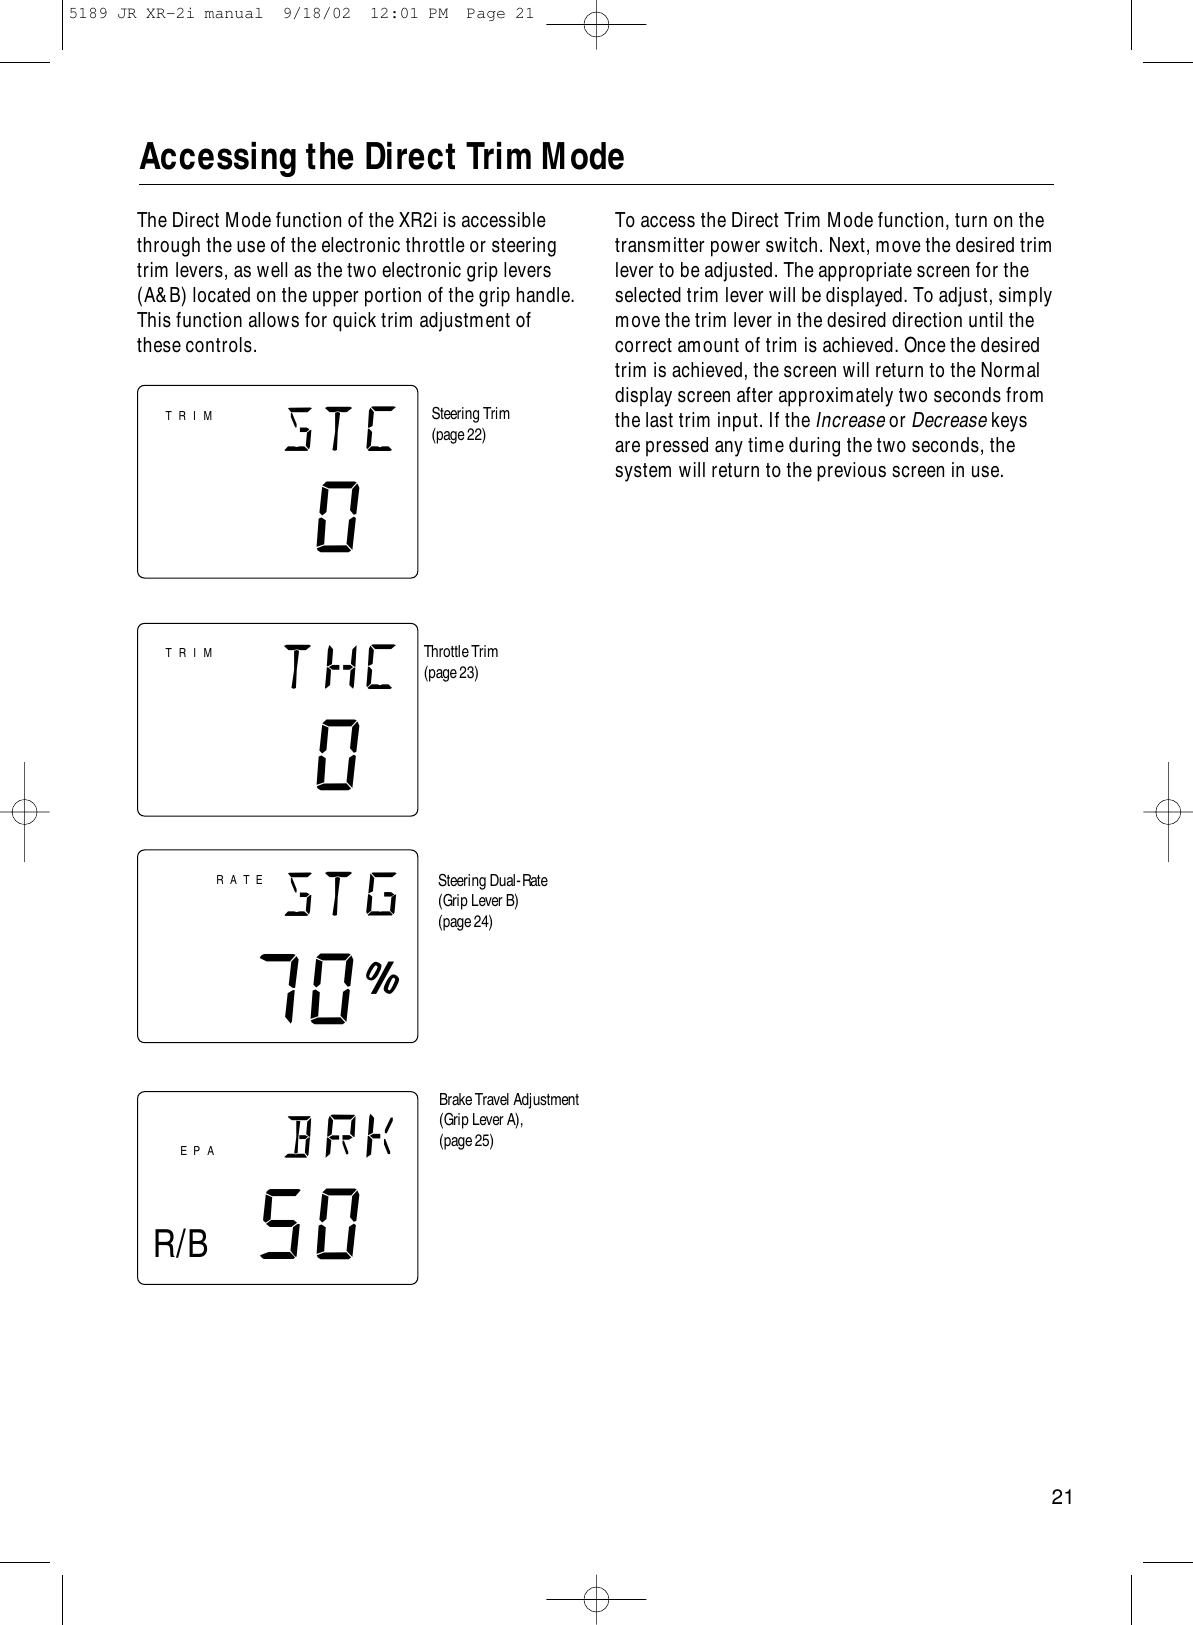 21Accessing the Direct Trim Modestc0thc0brk50EPAstg70∞RATESteering Trim(page 22)Throttle Trim(page 23)Steering Dual-Rate(Grip Lever B)(page 24)Brake Travel Adjustment (Grip Lever A), (page 25)TRIMTRIMR/BThe Direct Mode function of the XR2i is accessiblethrough the use of the electronic throttle or steeringtrim levers, as well as the two electronic grip levers(A&amp;B) located on the upper portion of the grip handle.This function allows for quick trim adjustment ofthese controls.To access the Direct Trim Mode function, turn on thetransmitter power switch. Next, move the desired trimlever to be adjusted. The appropriate screen for theselected trim lever will be displayed. To adjust, simplymove the trim lever in the desired direction until thecorrect amount of trim is achieved. Once the desiredtrim is achieved, the screen will return to the Normaldisplay screen after approximately two seconds fromthe last trim input. If the Increase or Decrease keysare pressed any time during the two seconds, the system will return to the previous screen in use.5189 JR XR-2i manual  9/18/02  12:01 PM  Page 21